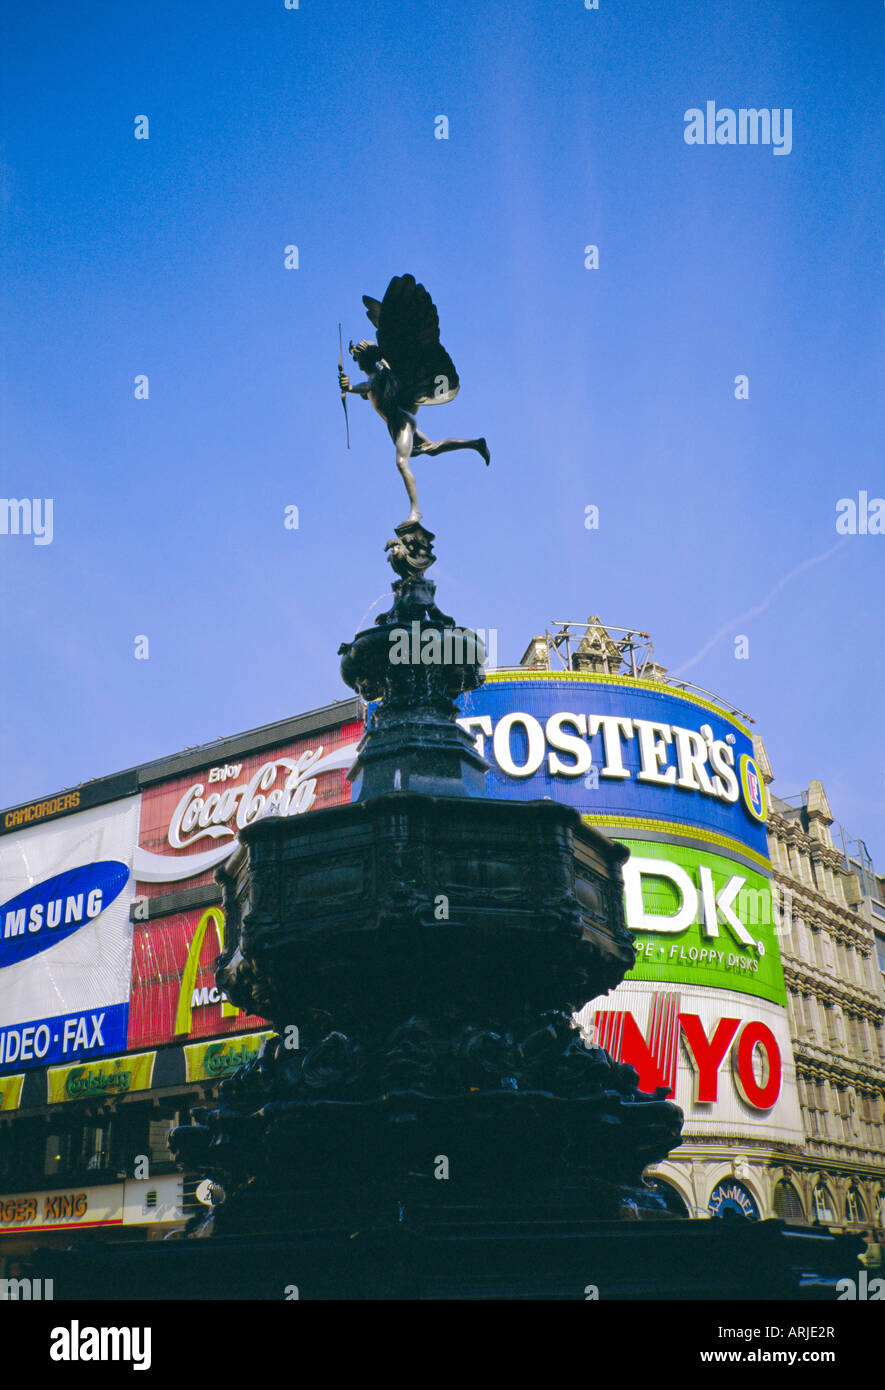 Statue de Eros, Piccadilly Circus, Londres, Angleterre, Royaume-Uni Banque D'Images